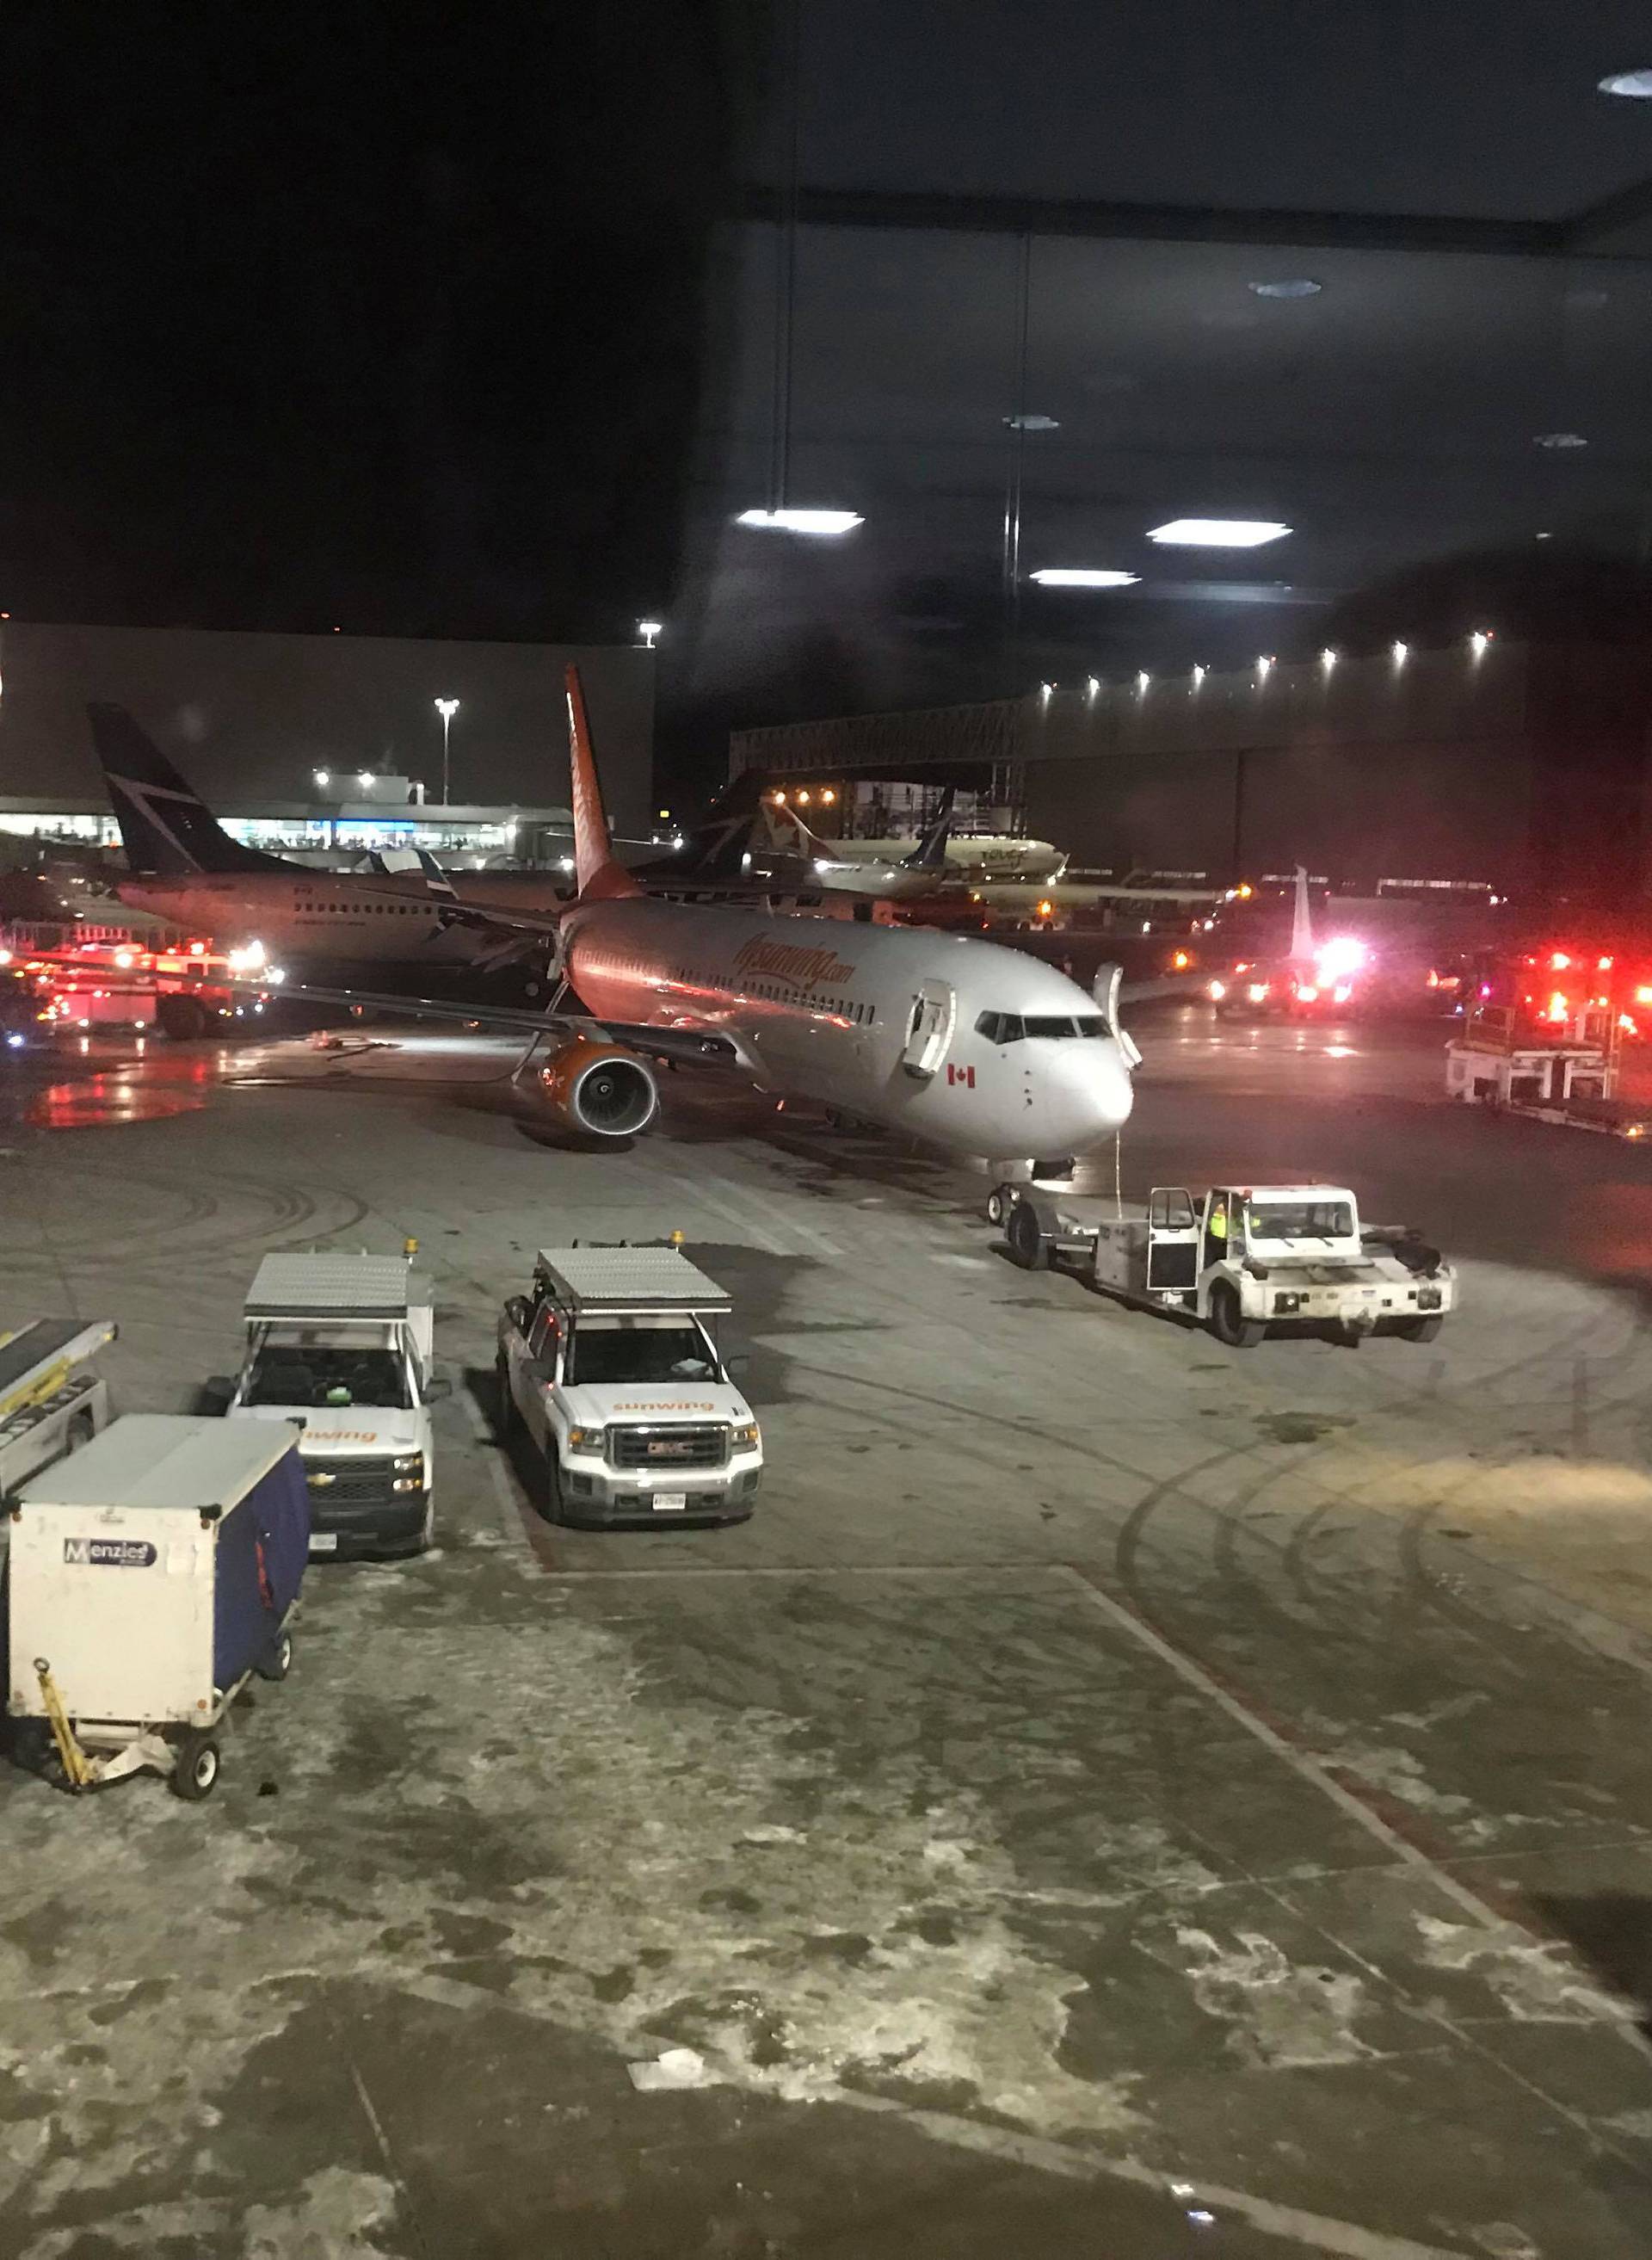 Emergency services arrive at a site where two planes collided at Toronto's Pearson Airport